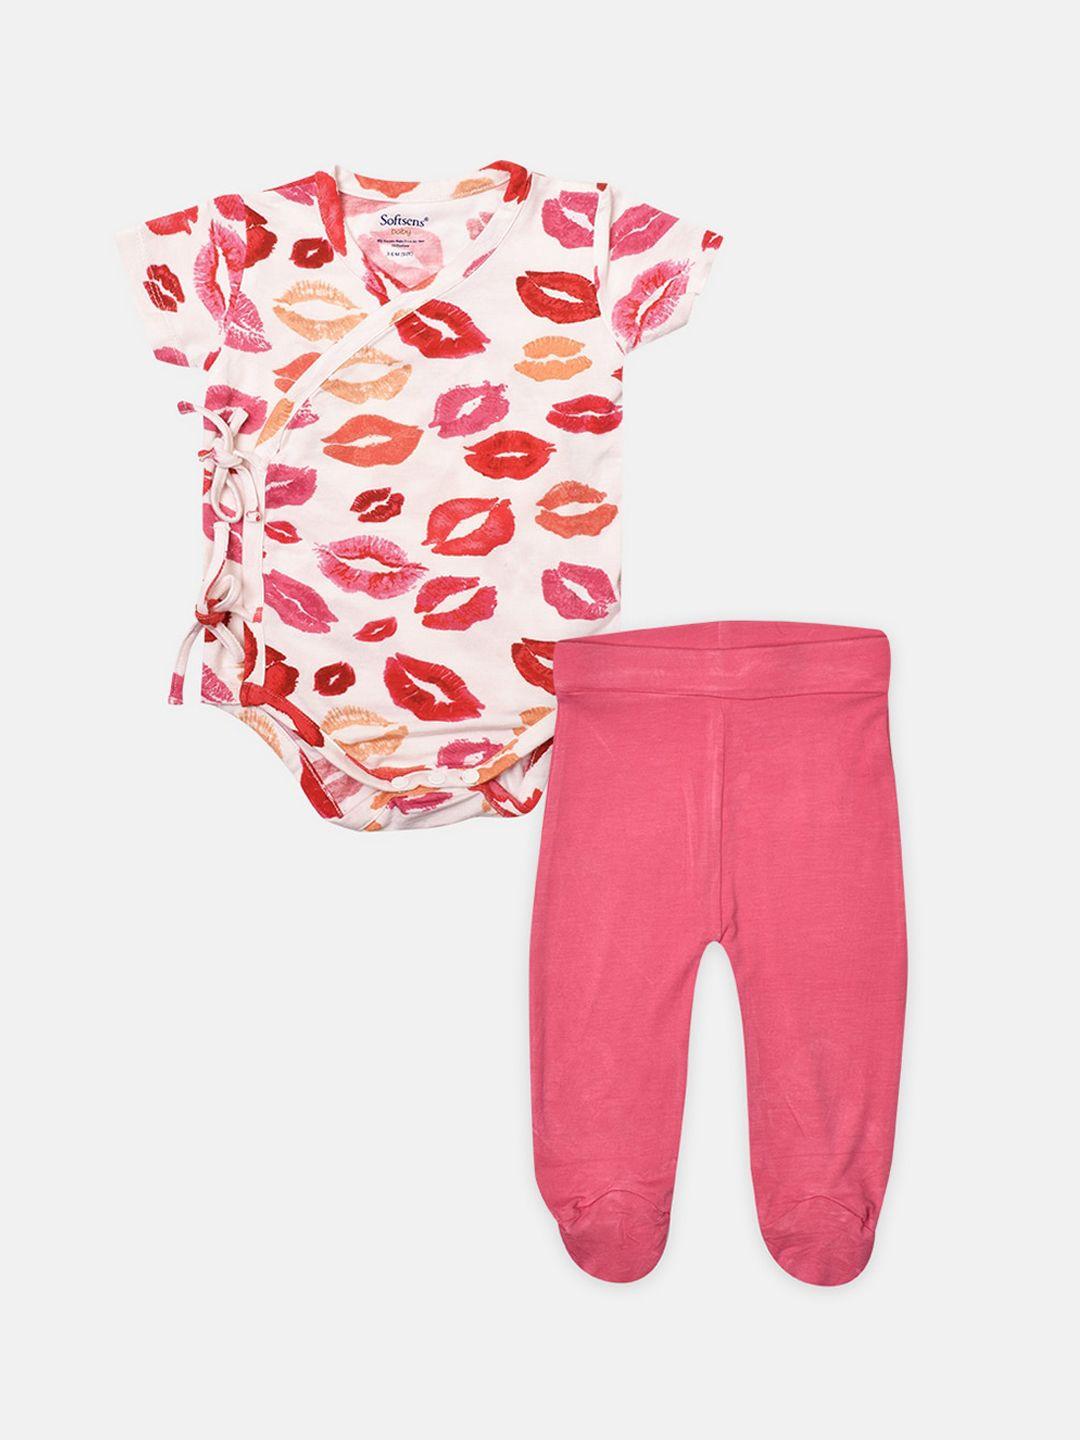 softsens kids pink & white printed top with leggings